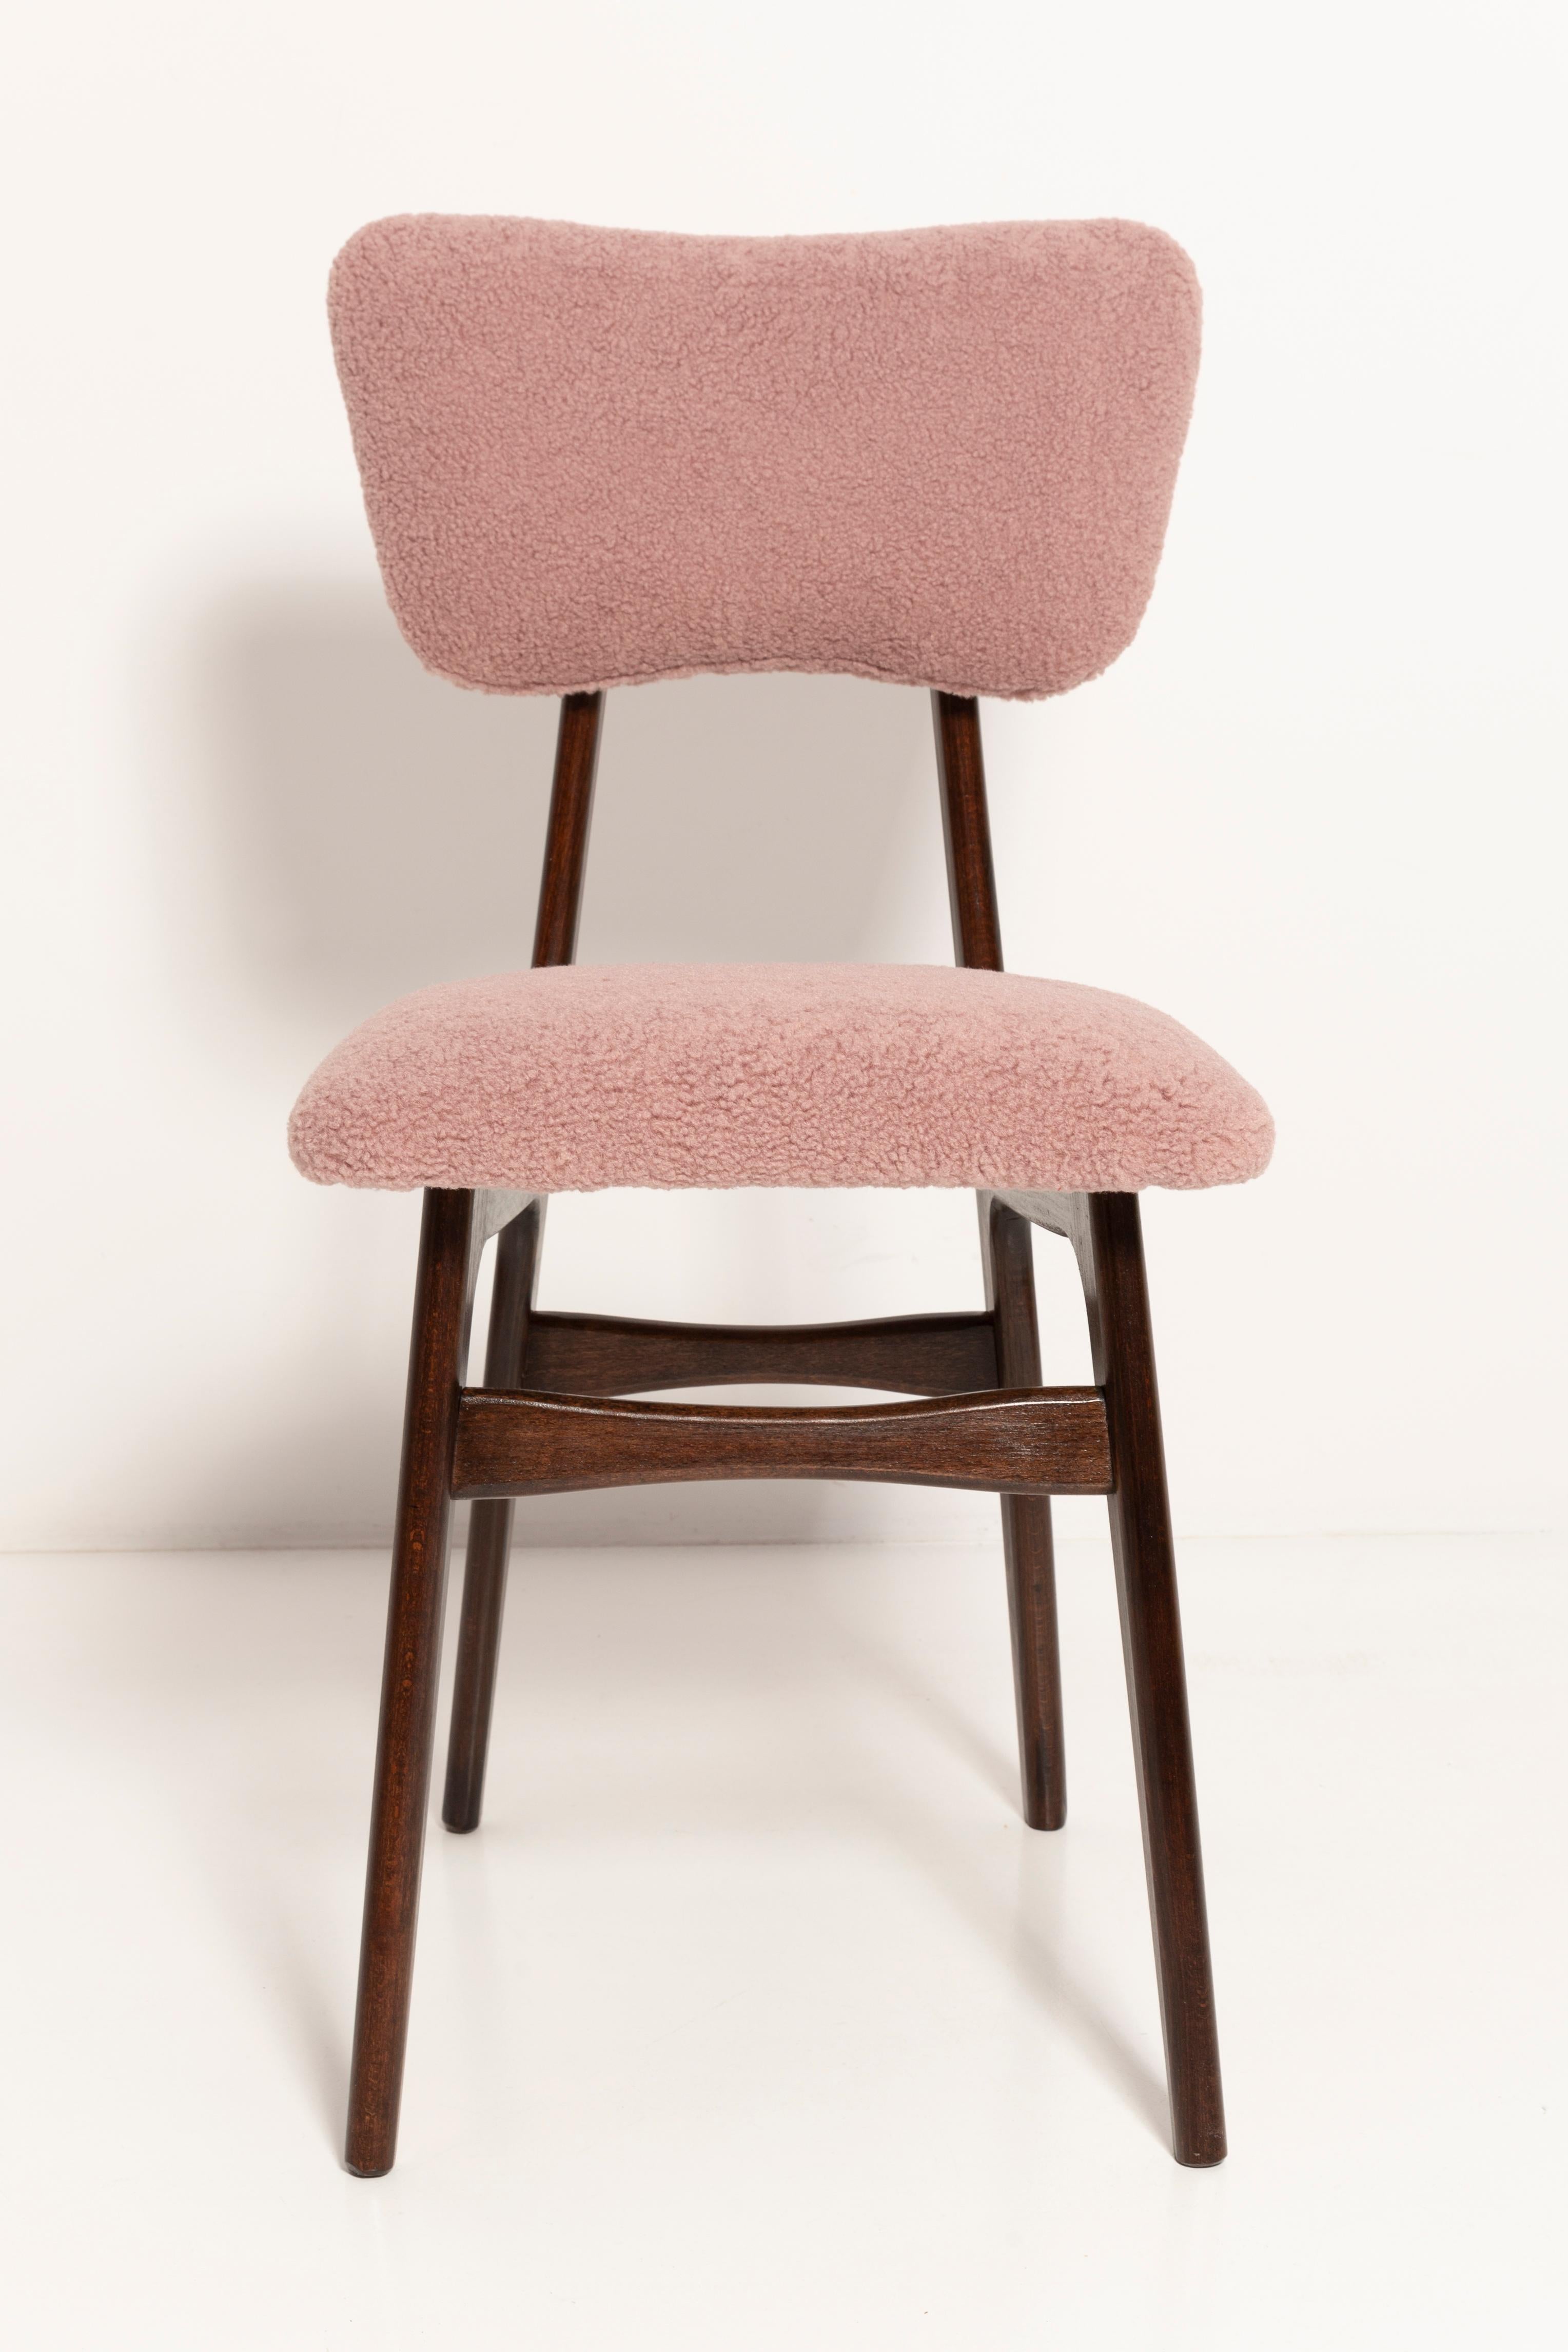 Set of Four Mid Century Butterfly Dining Chairs, Pink Boucle, Europe, 1960s For Sale 5